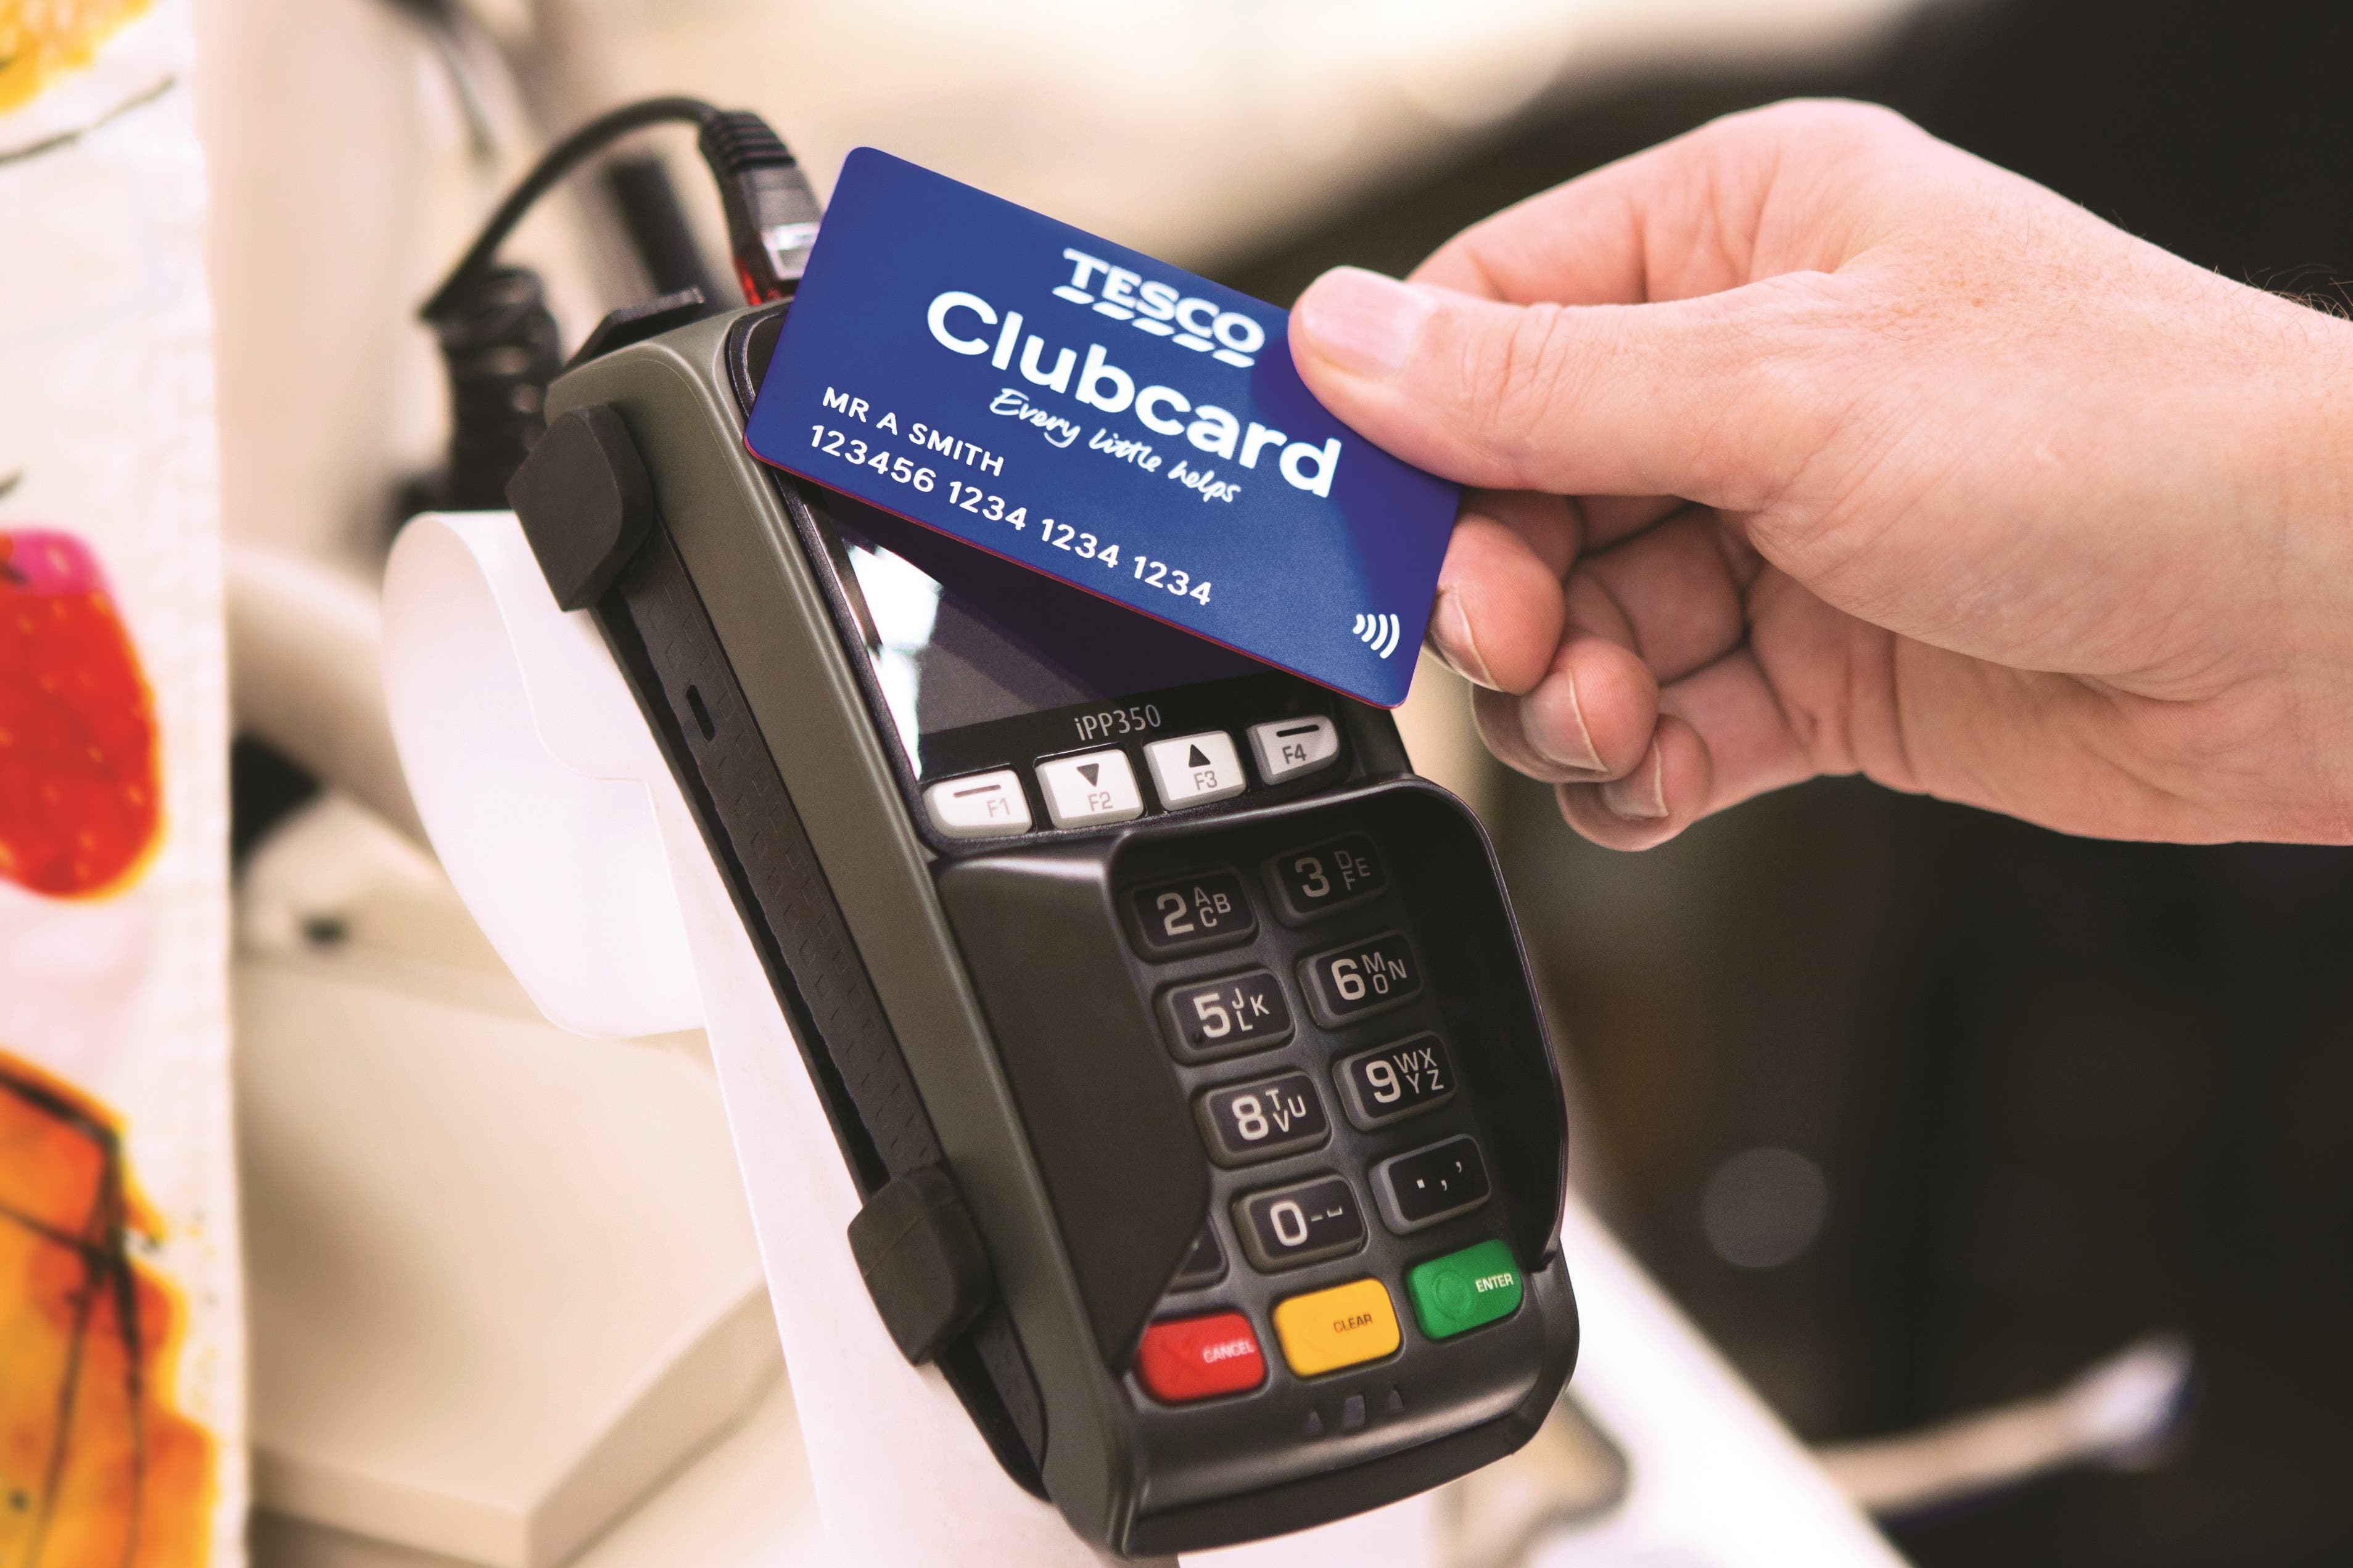 Clubcards are a necessary evil if you want to bag the best prices at Tesco